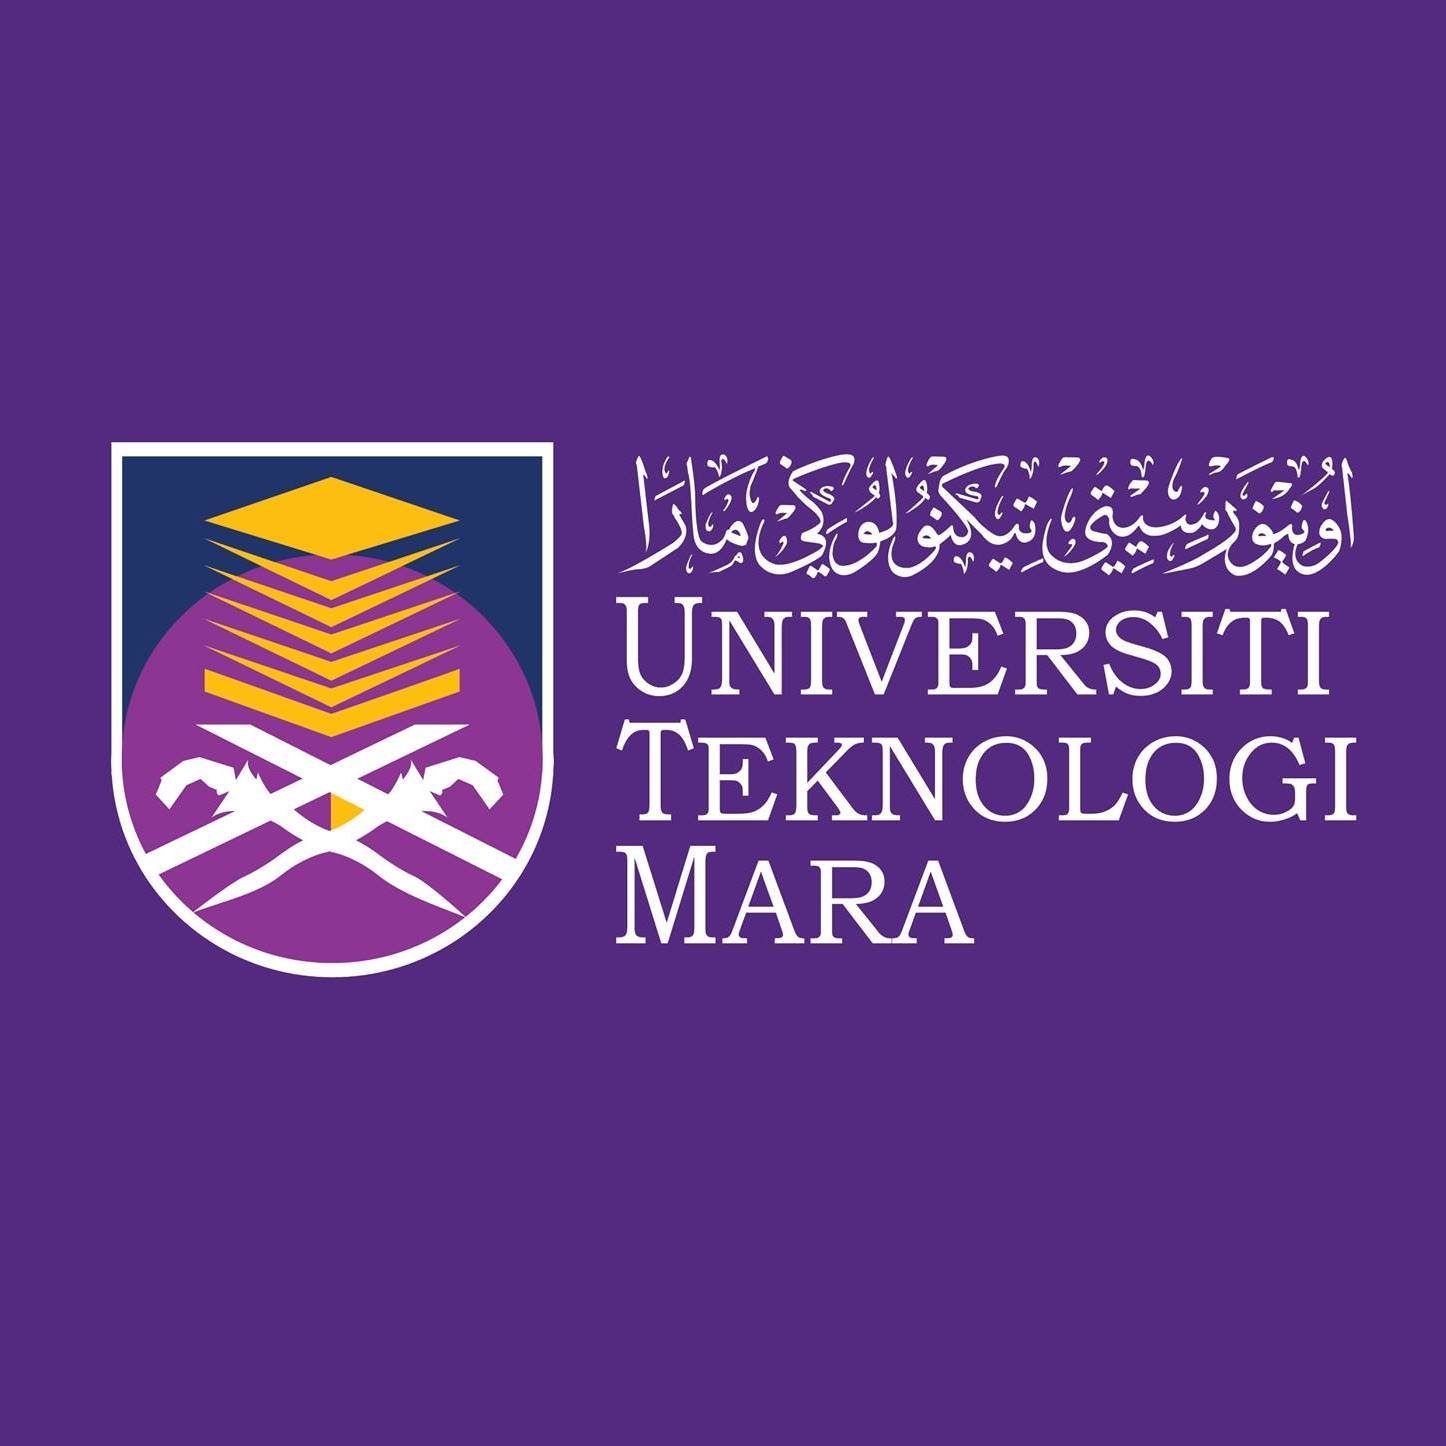 Welcome to UiTM Cawangan Melaka Official Twitter. Follow us for more updates!